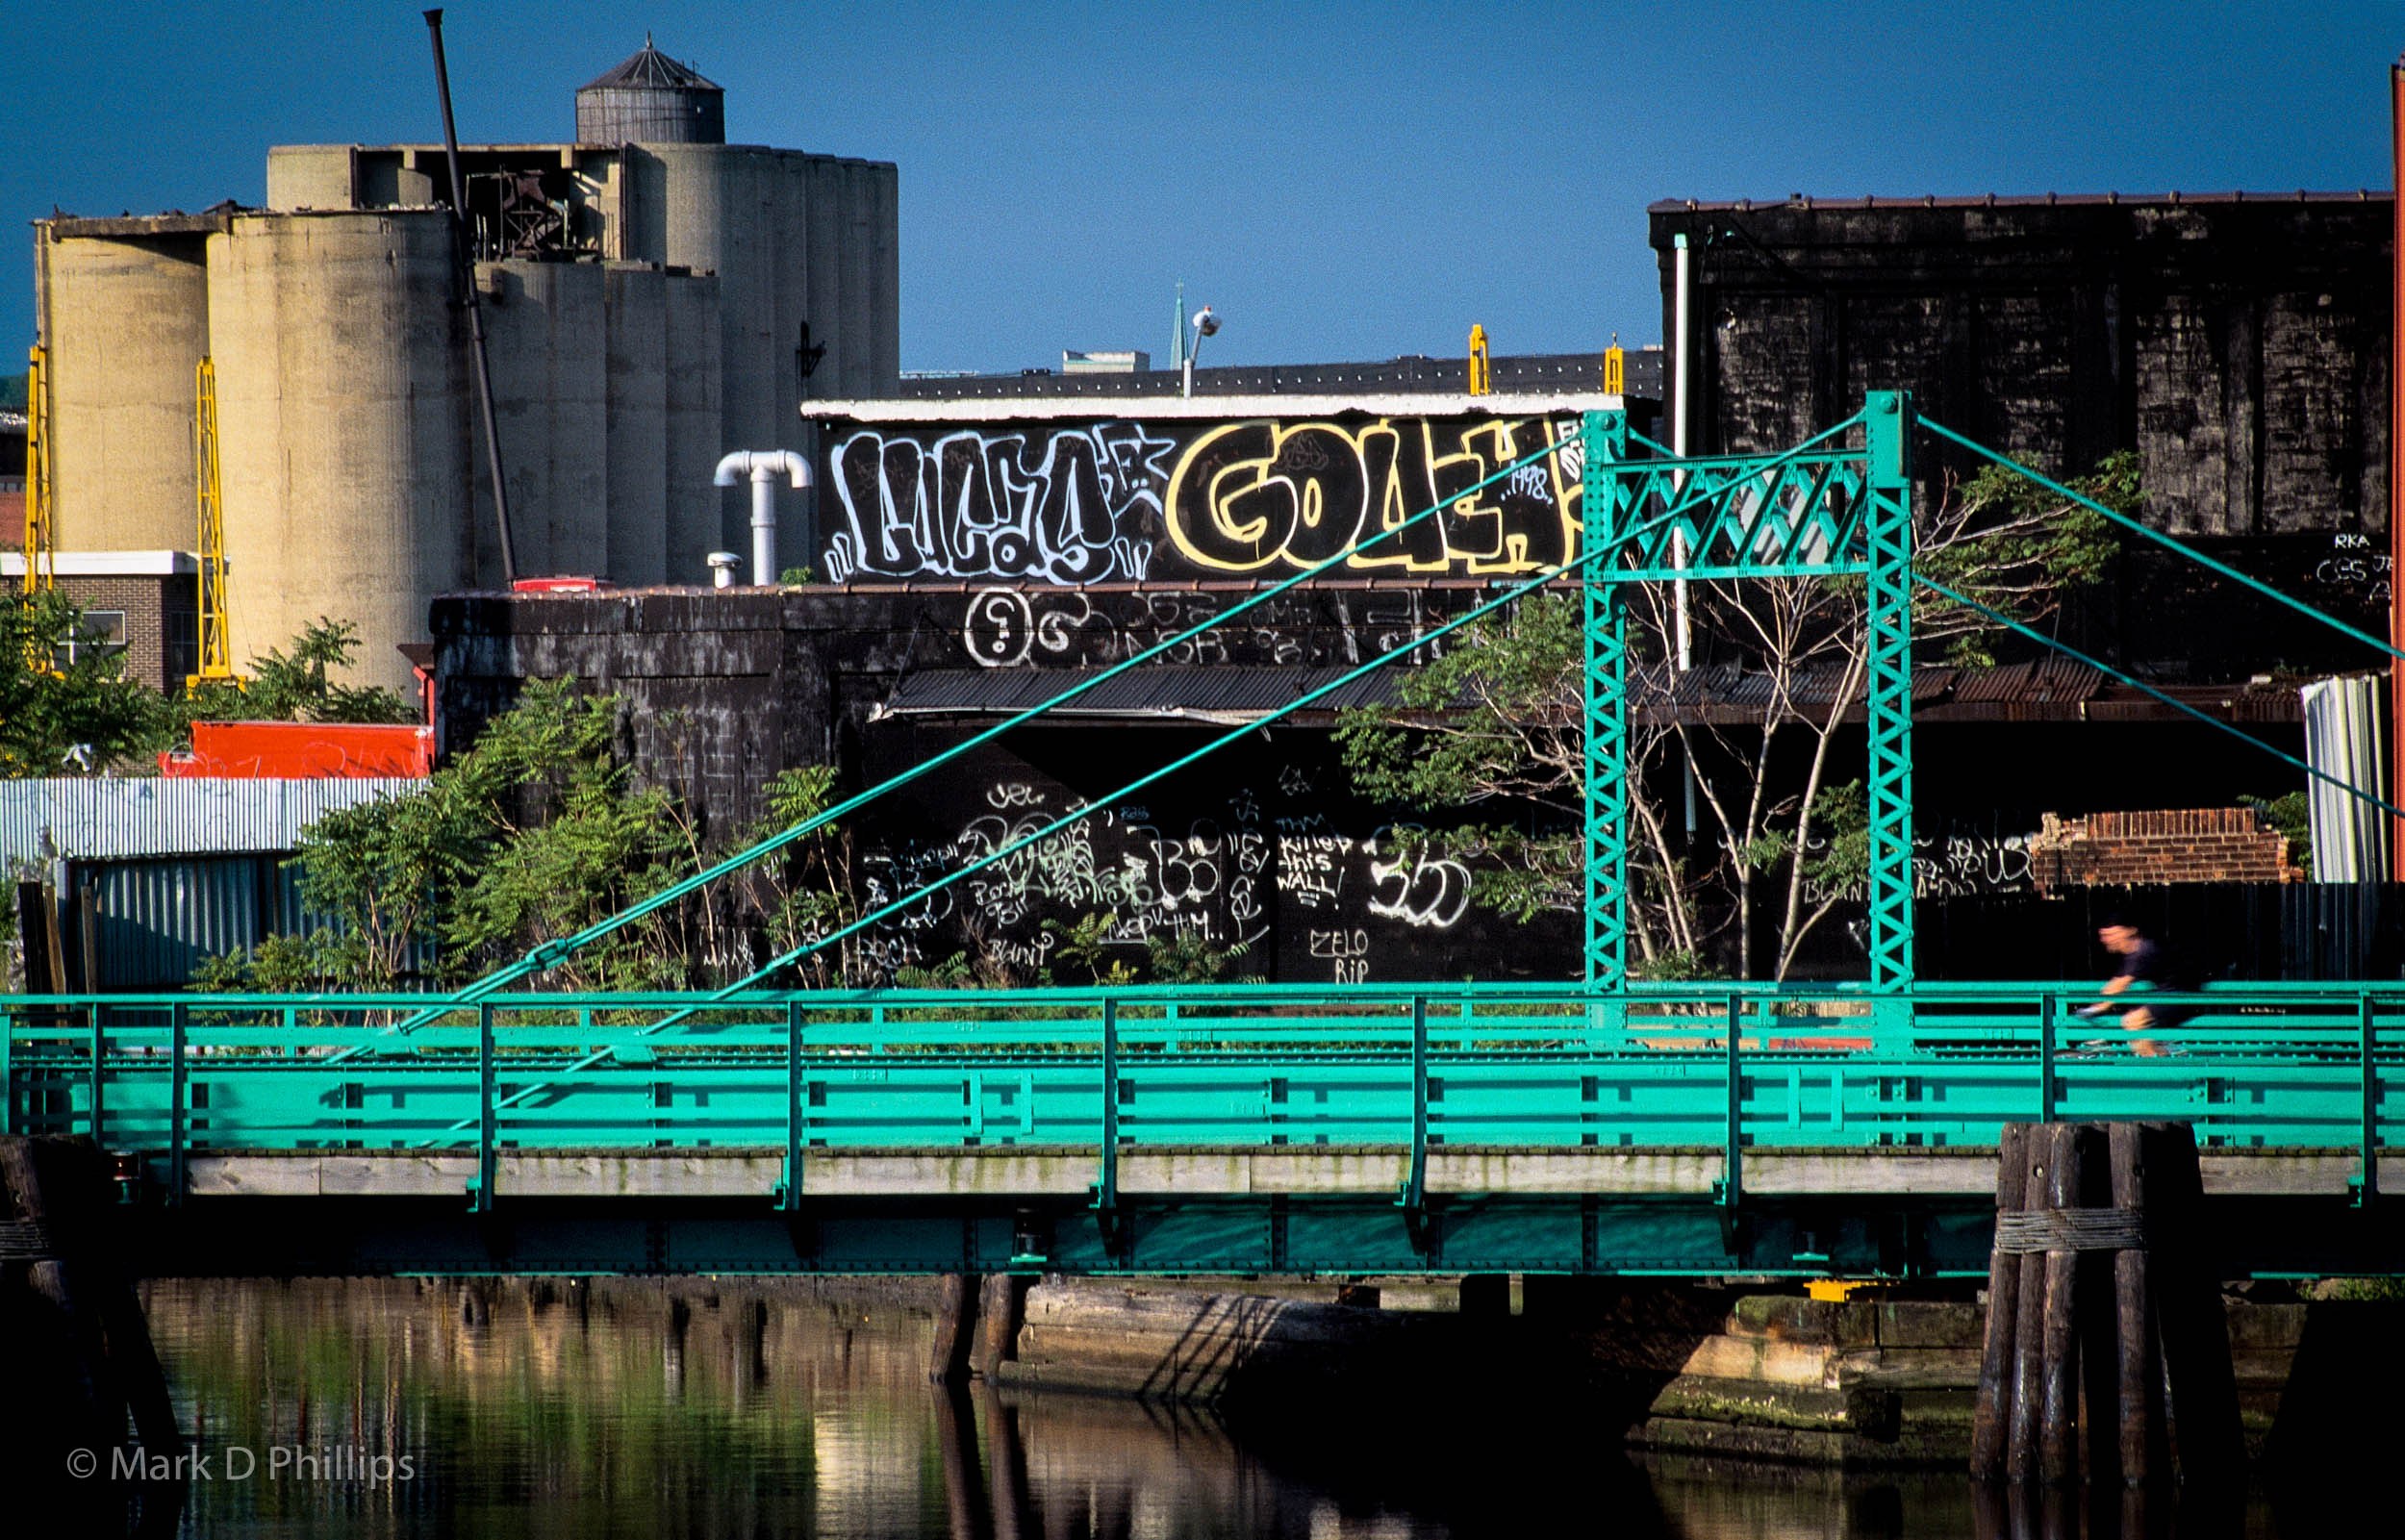 
        <div class='title'>
          Gowanus: Lucas Gouch, Carroll Bridge
        </div>
       
        <div class='description'>
          My earliest graffiti picture from the Gowanus Canal was widely published. The signature looming over the Carroll Street Bridge was completed in 1998 by by Lucas Gouch, the artist. The year is in the HR at the end of his name. An effort had begun to clean the waterway and several of my images, including this one, appeared in the New York Times. ©Mark D Phillips
        </div>
      